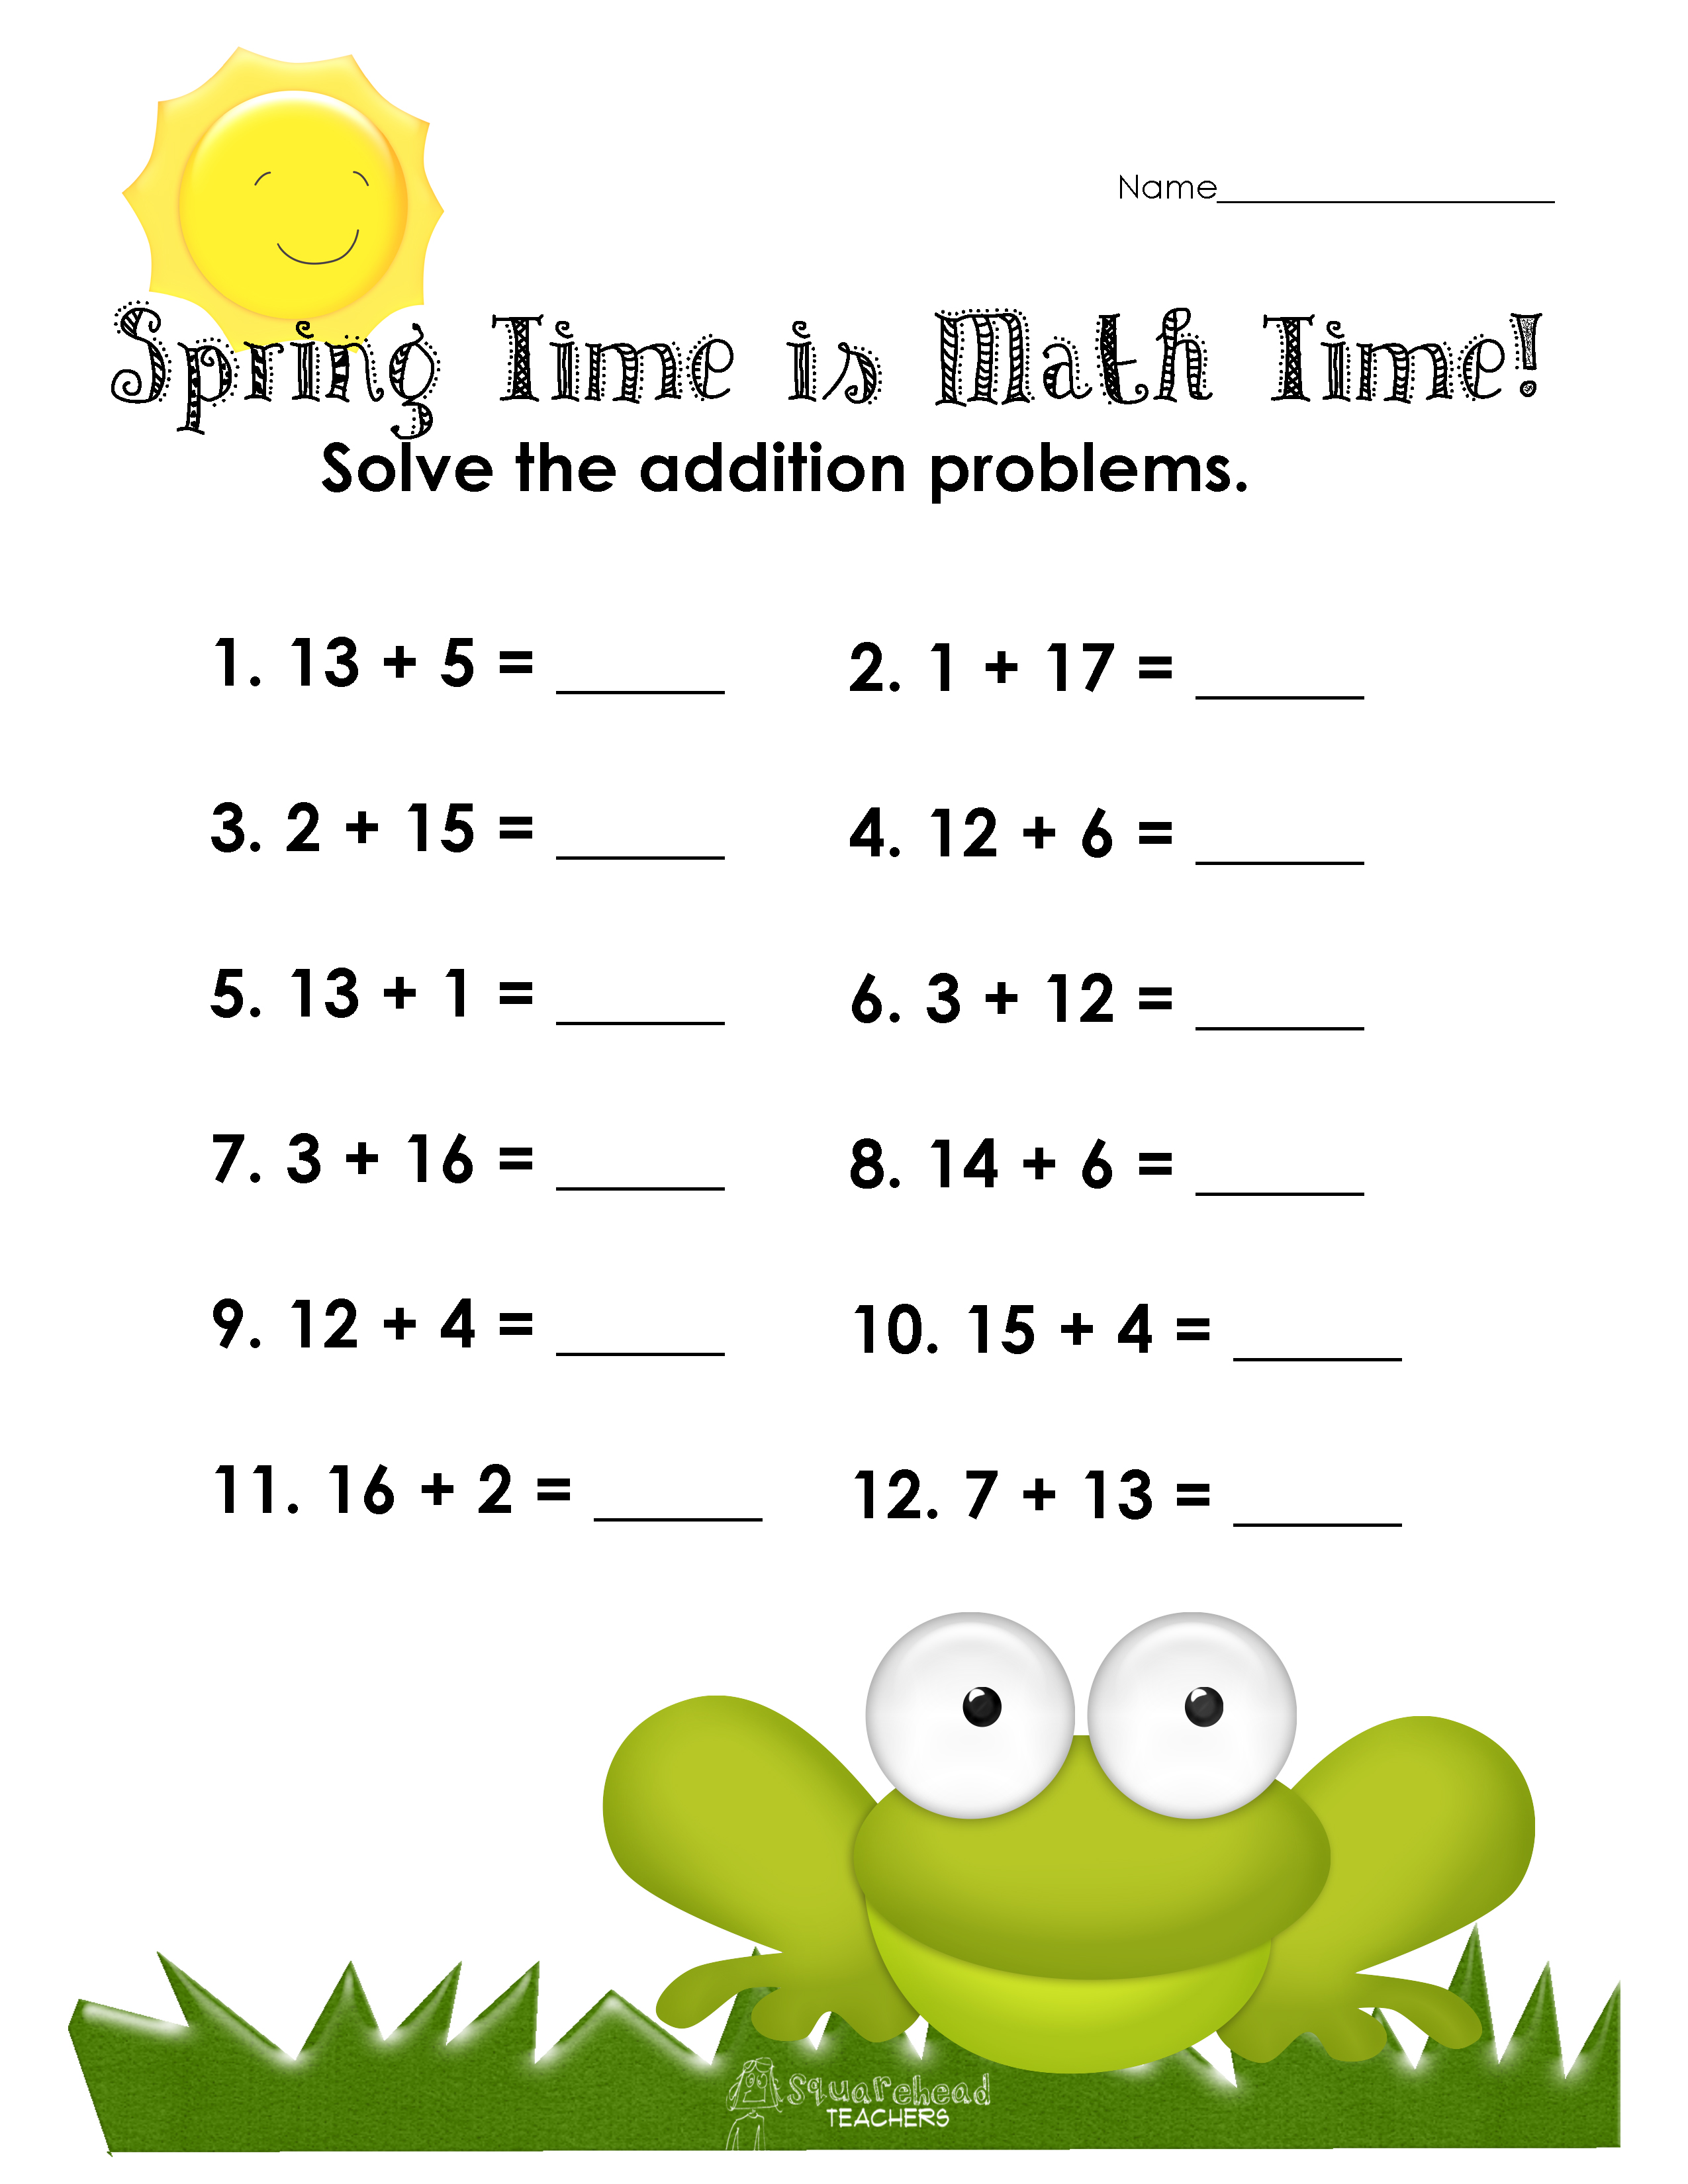 spring-time-means-math-time-free-addition-worksheet-squarehead